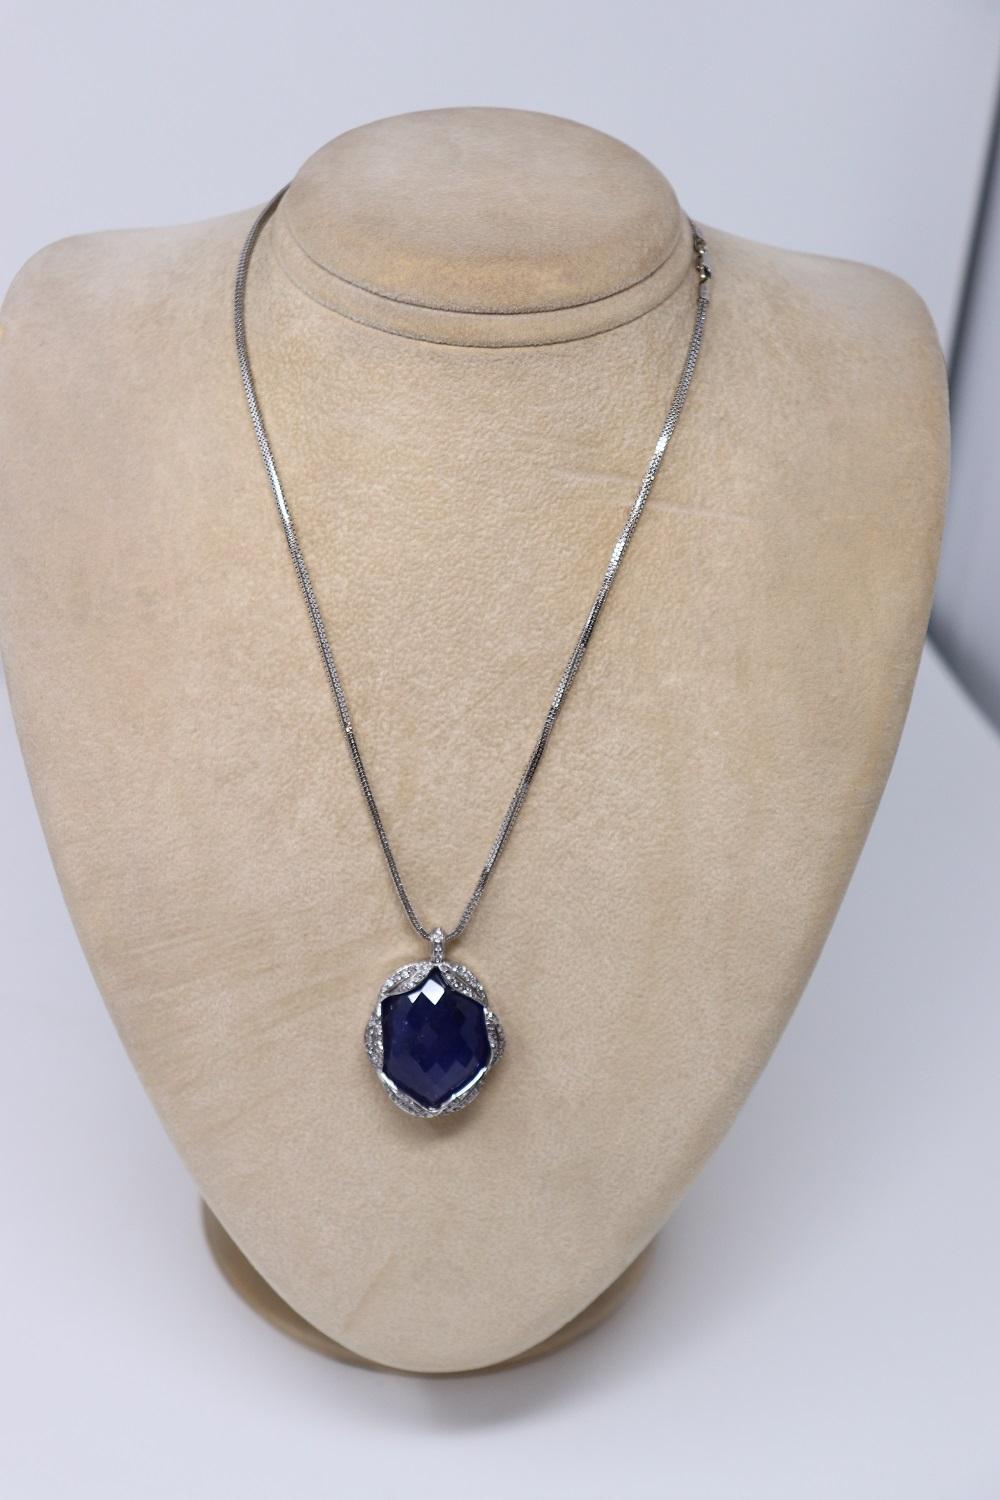 Oval Cut 65 Ct Tanzanite and Diamond Pendant Necklace in 18 Kt White Gold For Sale